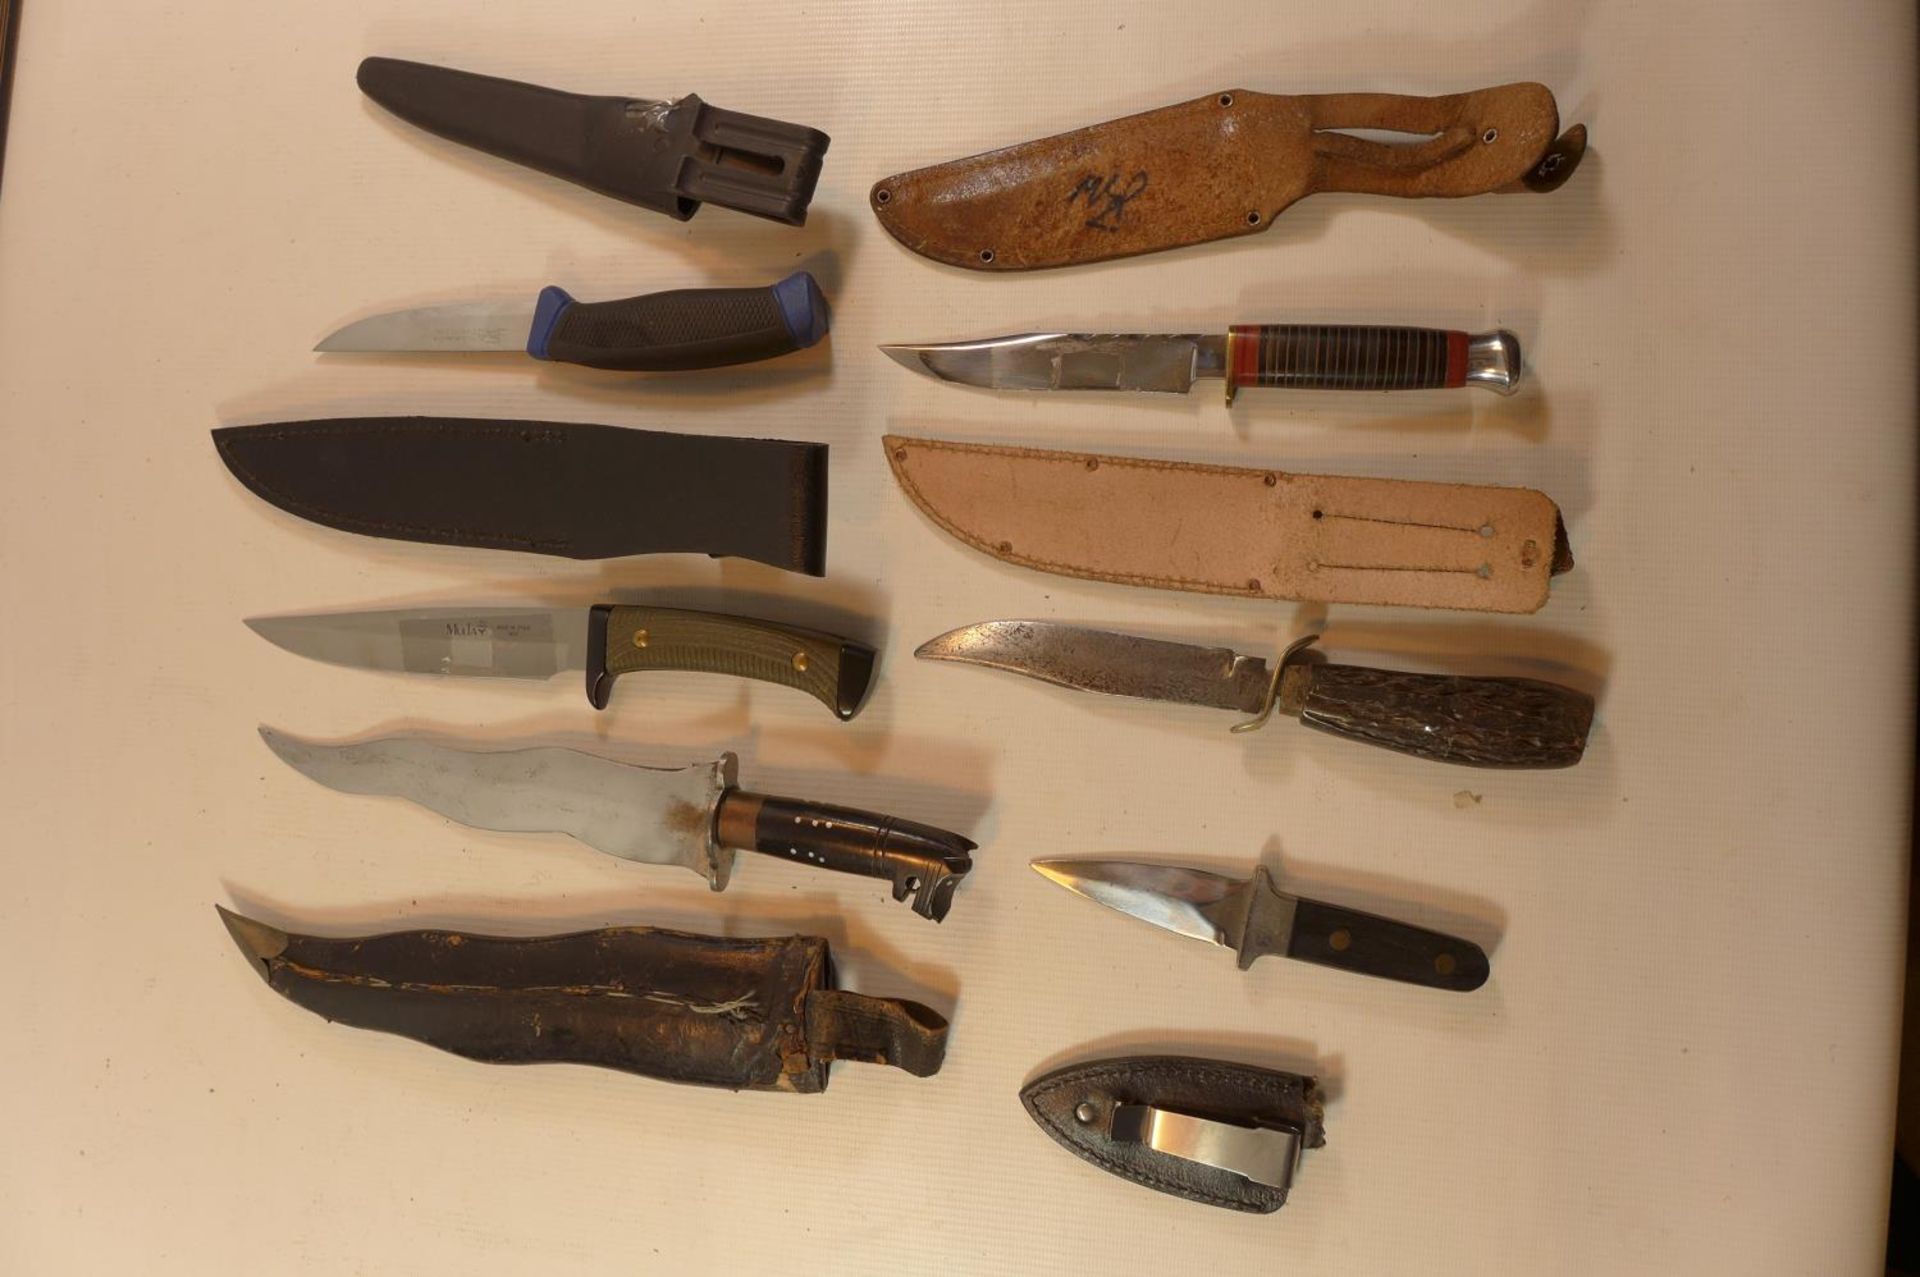 SIX ASSORTED HUNTING KNIVES, TO INCLUDE A BOWIE EXAMPLE, BLADE LENGTHS VARY FROM 8CM TO 20CM - Image 2 of 4